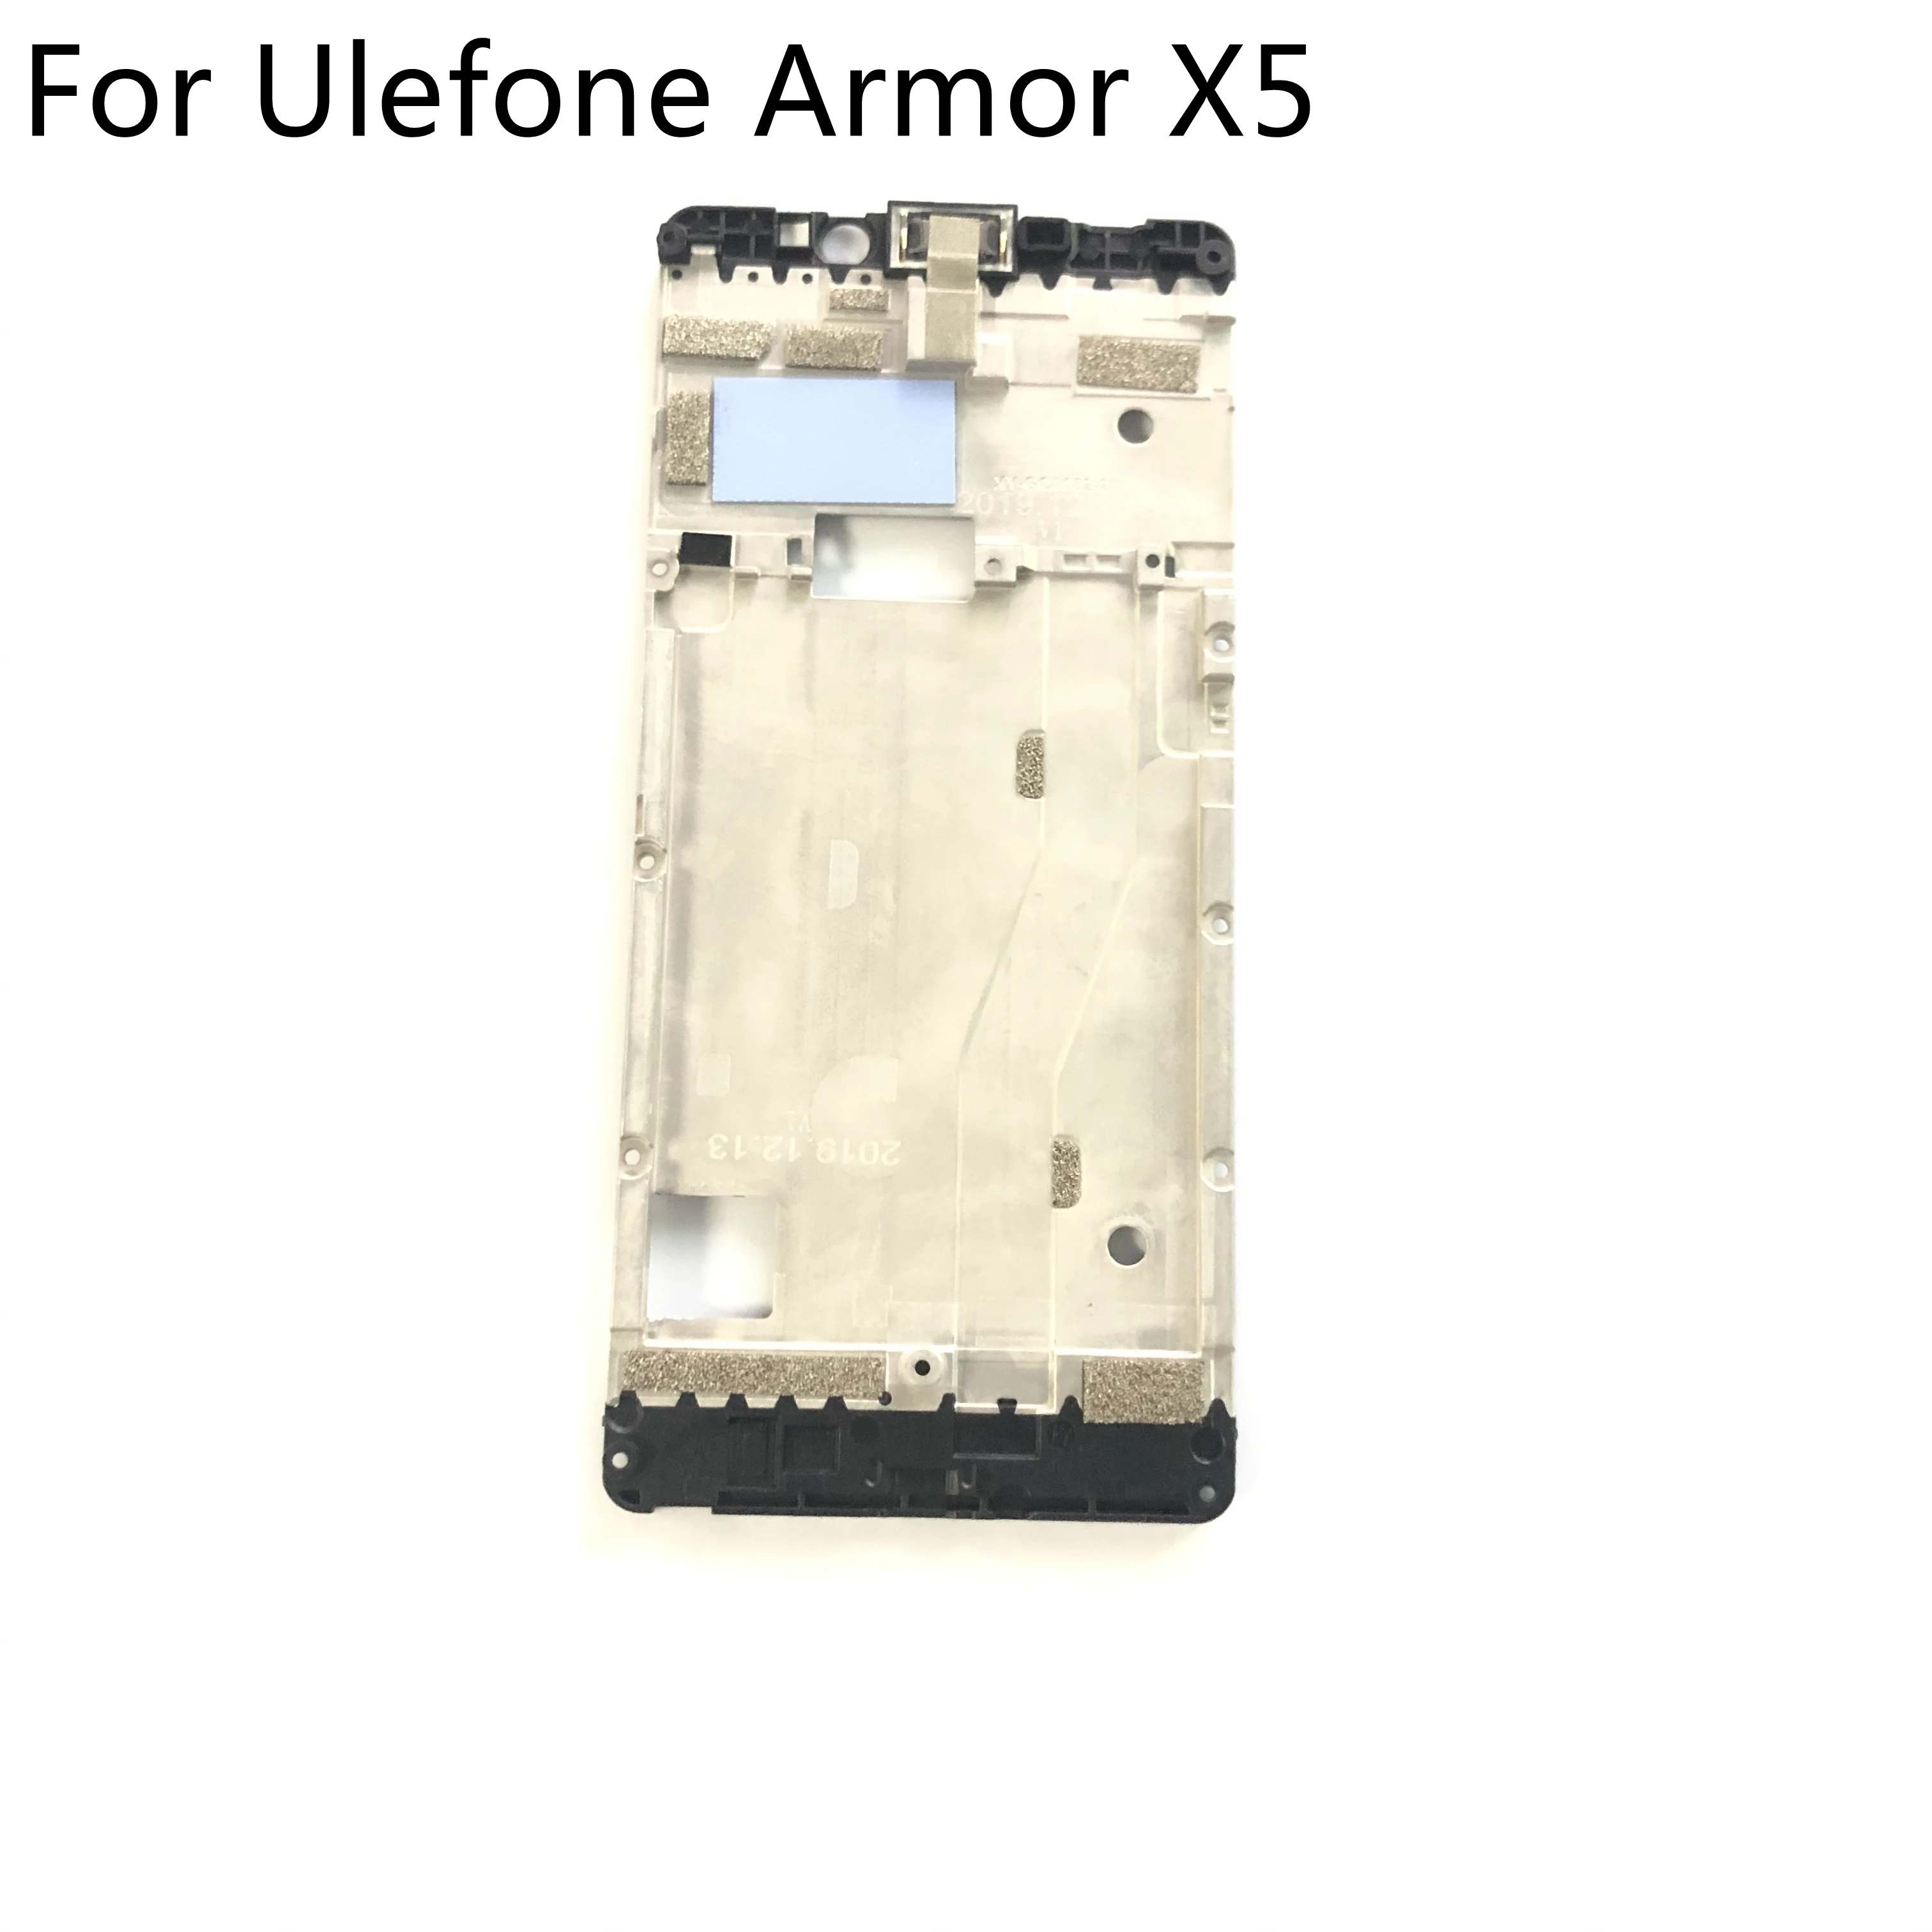 

Ulefone Armor X5 Used LCD Middle Frame Shell Case For Ulefone Armor X5 MT6762 5.5" 1440x720 Smartphone